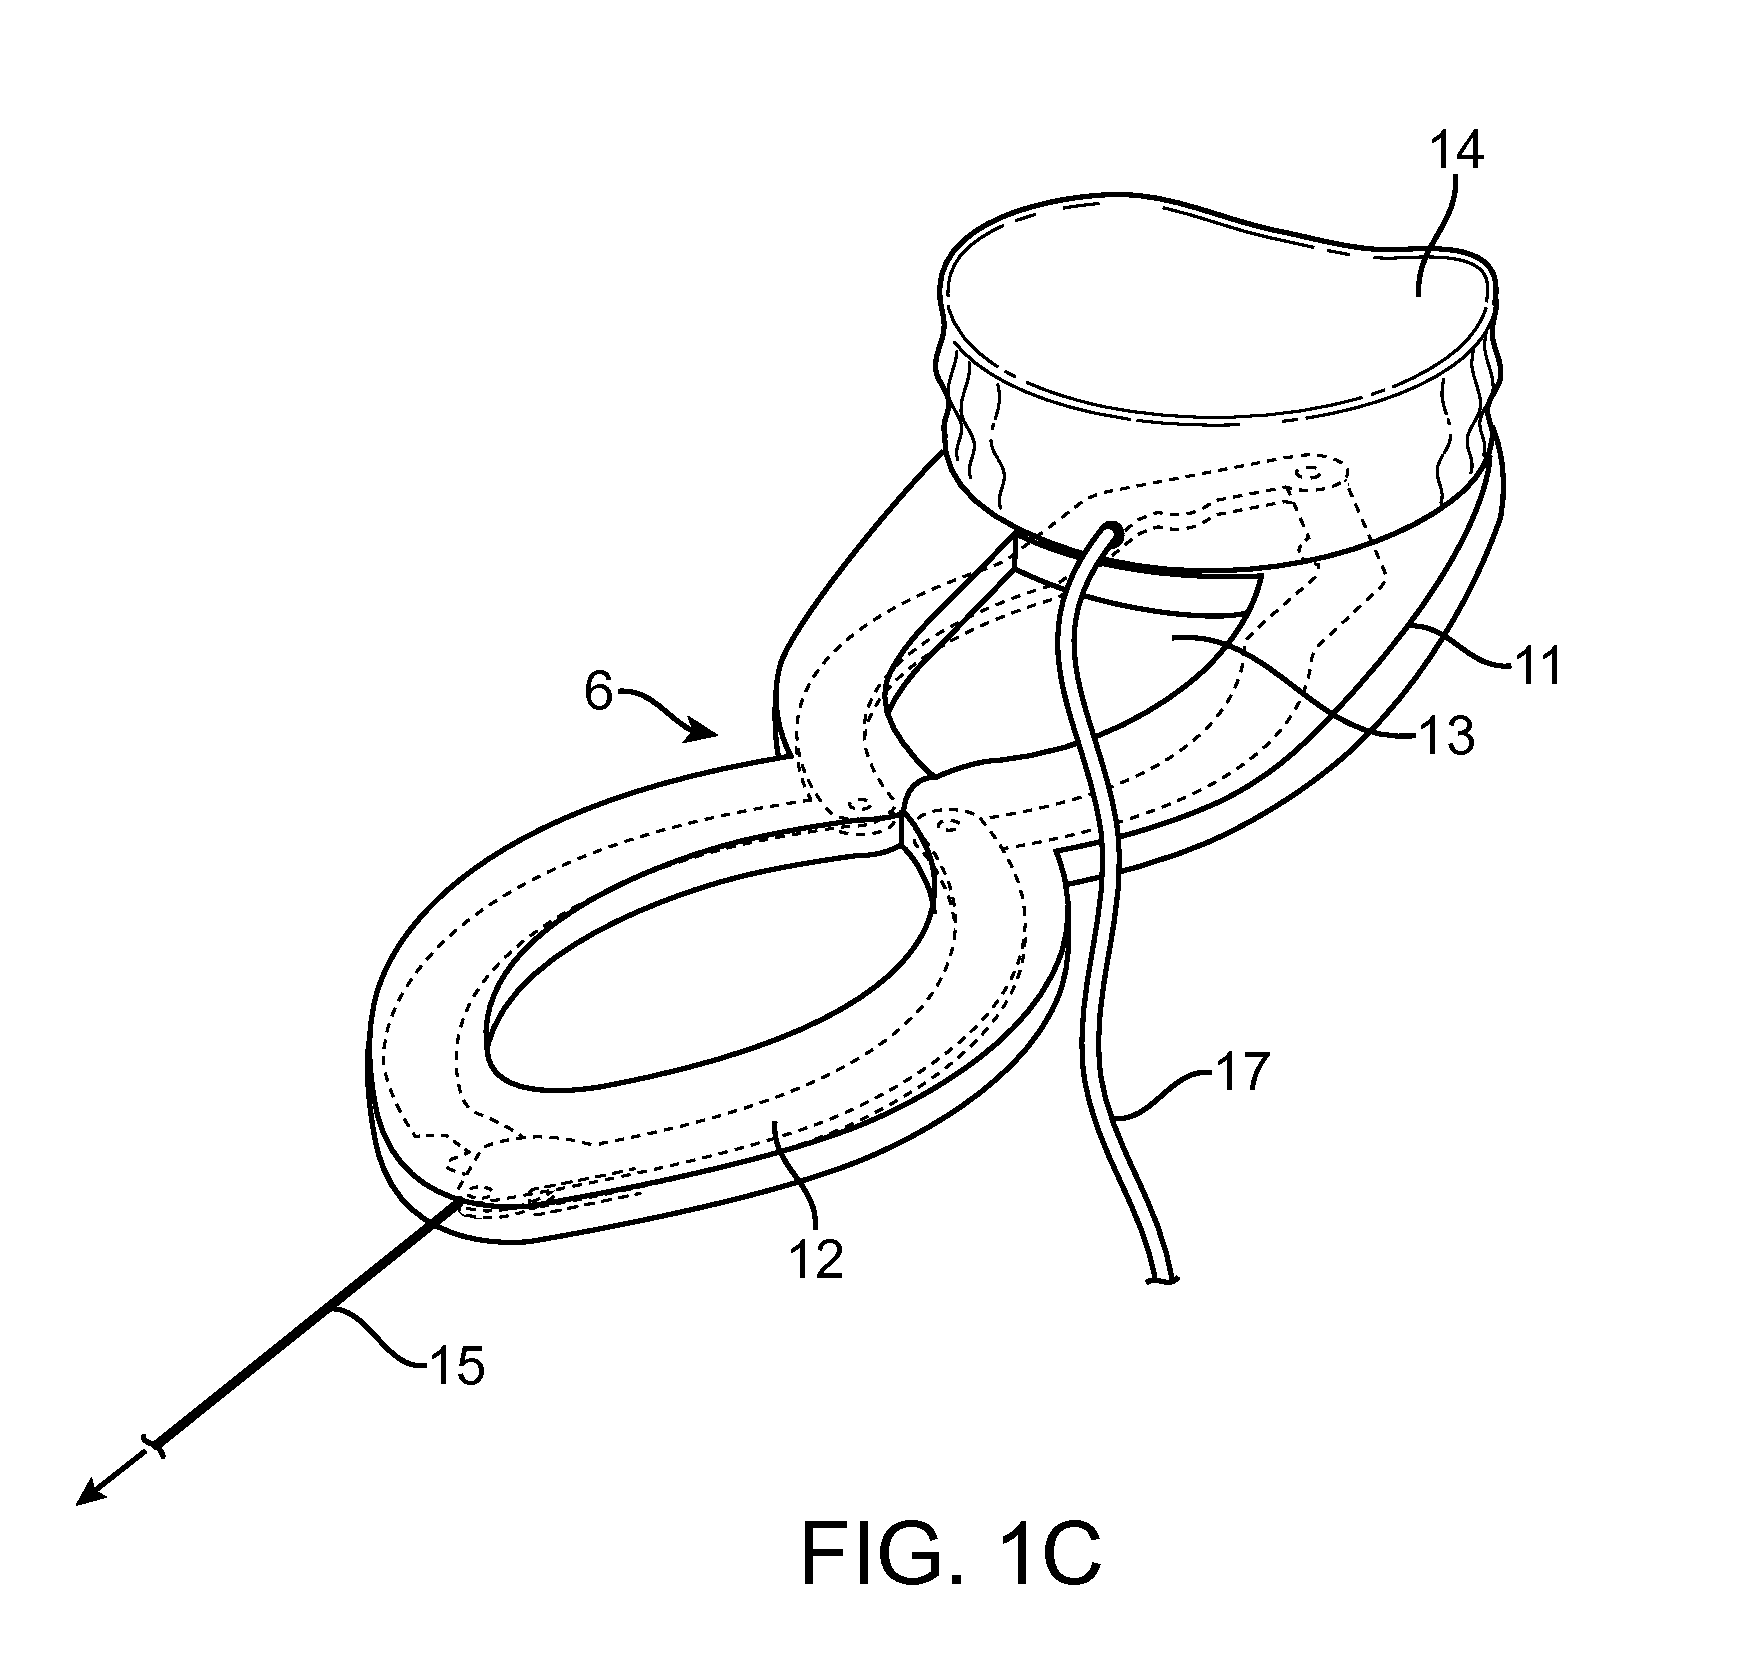 Intra-vaginal devices and methods for treating fecal incontinence